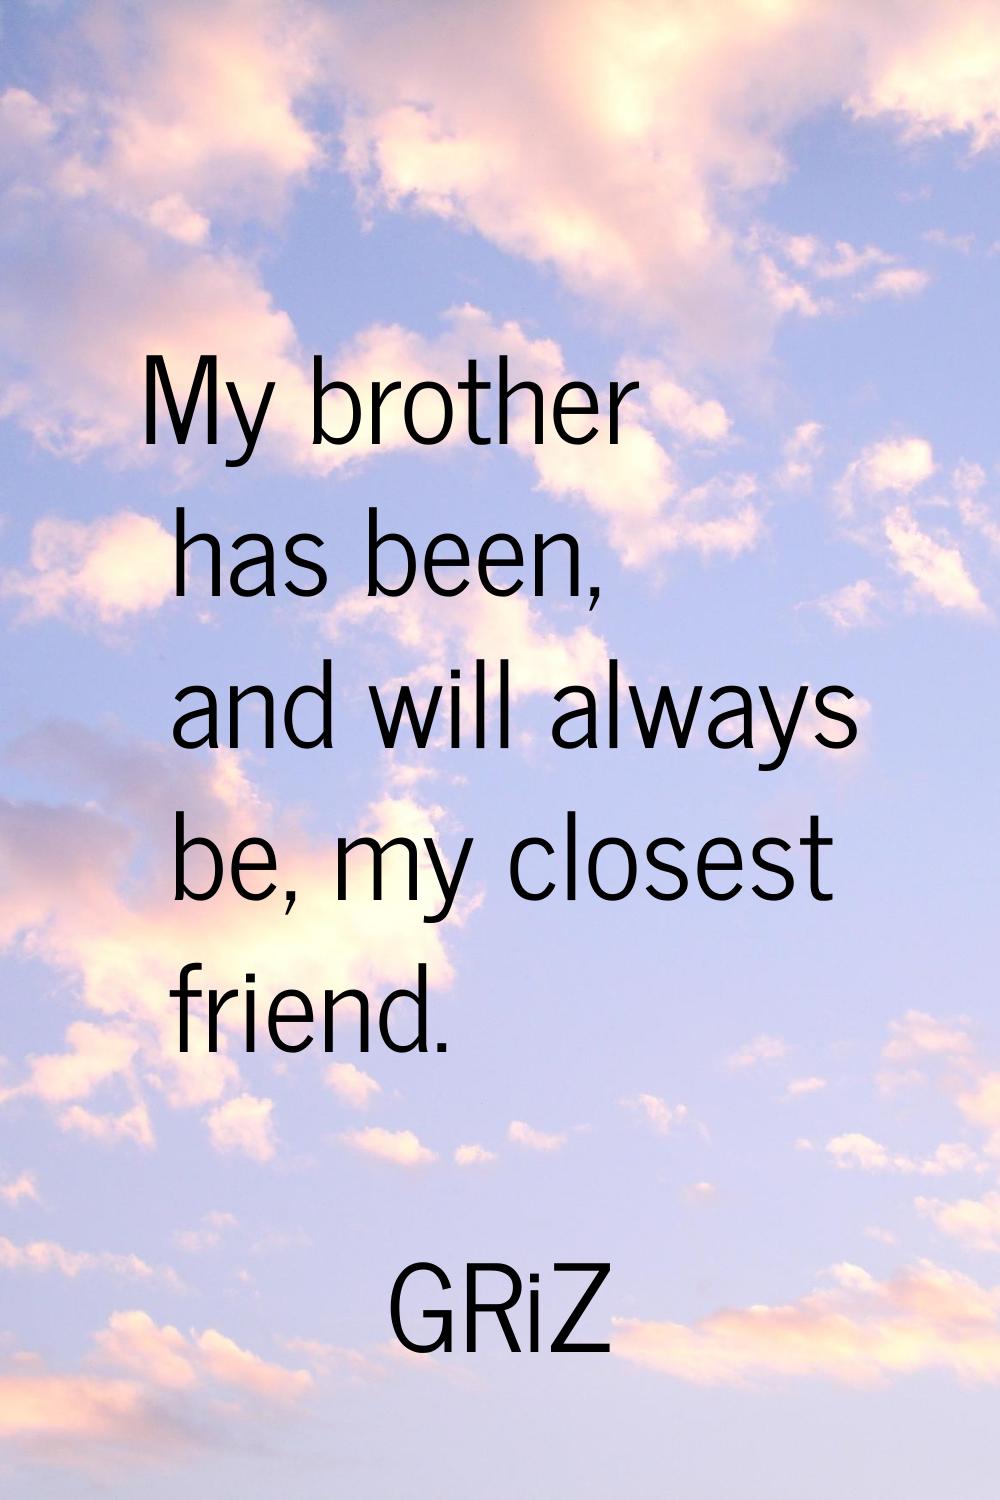 My brother has been, and will always be, my closest friend.